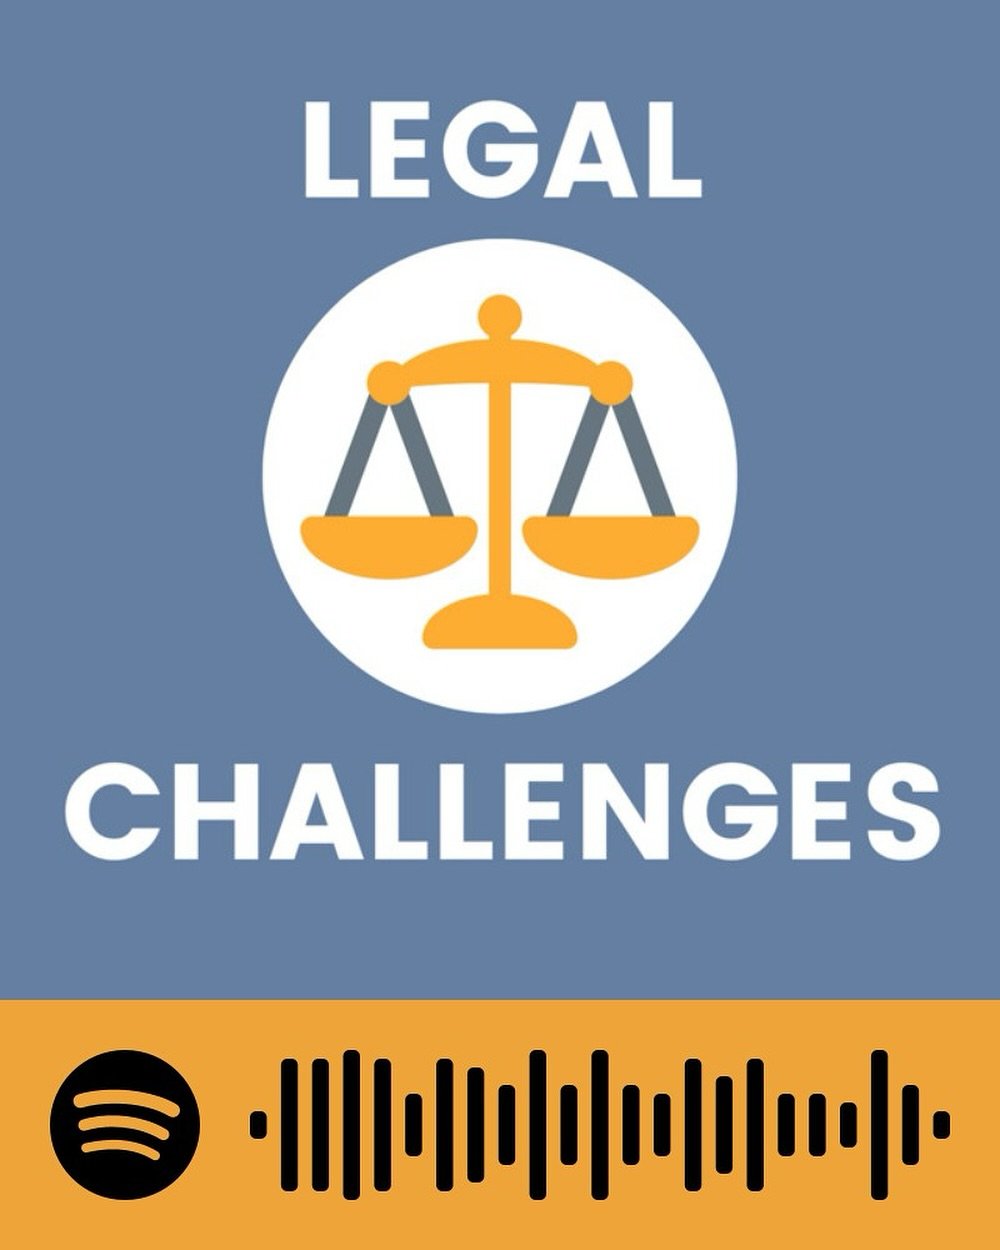 Our latest podcast 🎧 on  the legal challenges faced by people experiencing homelessness is now live on Spotify!

You can listen by searching Loyola Street Medicine on Spotify or on our website at loyolastreetmedicine.com/podcast.

#loyolastreetmedic